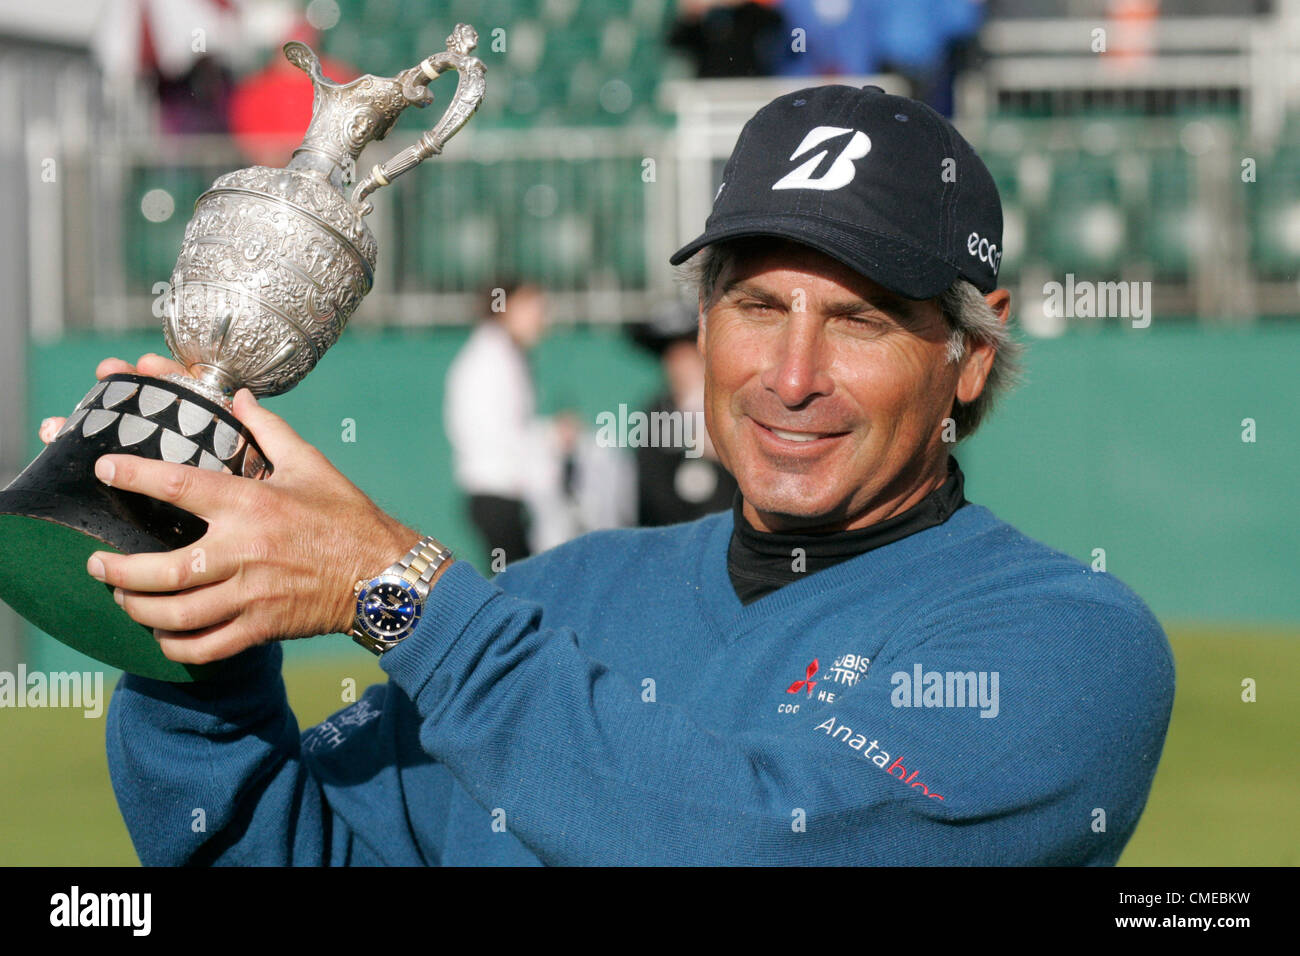 Ayrshire, UK. 29th July, 2012. Fred COUPLES winner of the The Rolex Senior Open Championship from Turnberry with his trophy Stock Photo